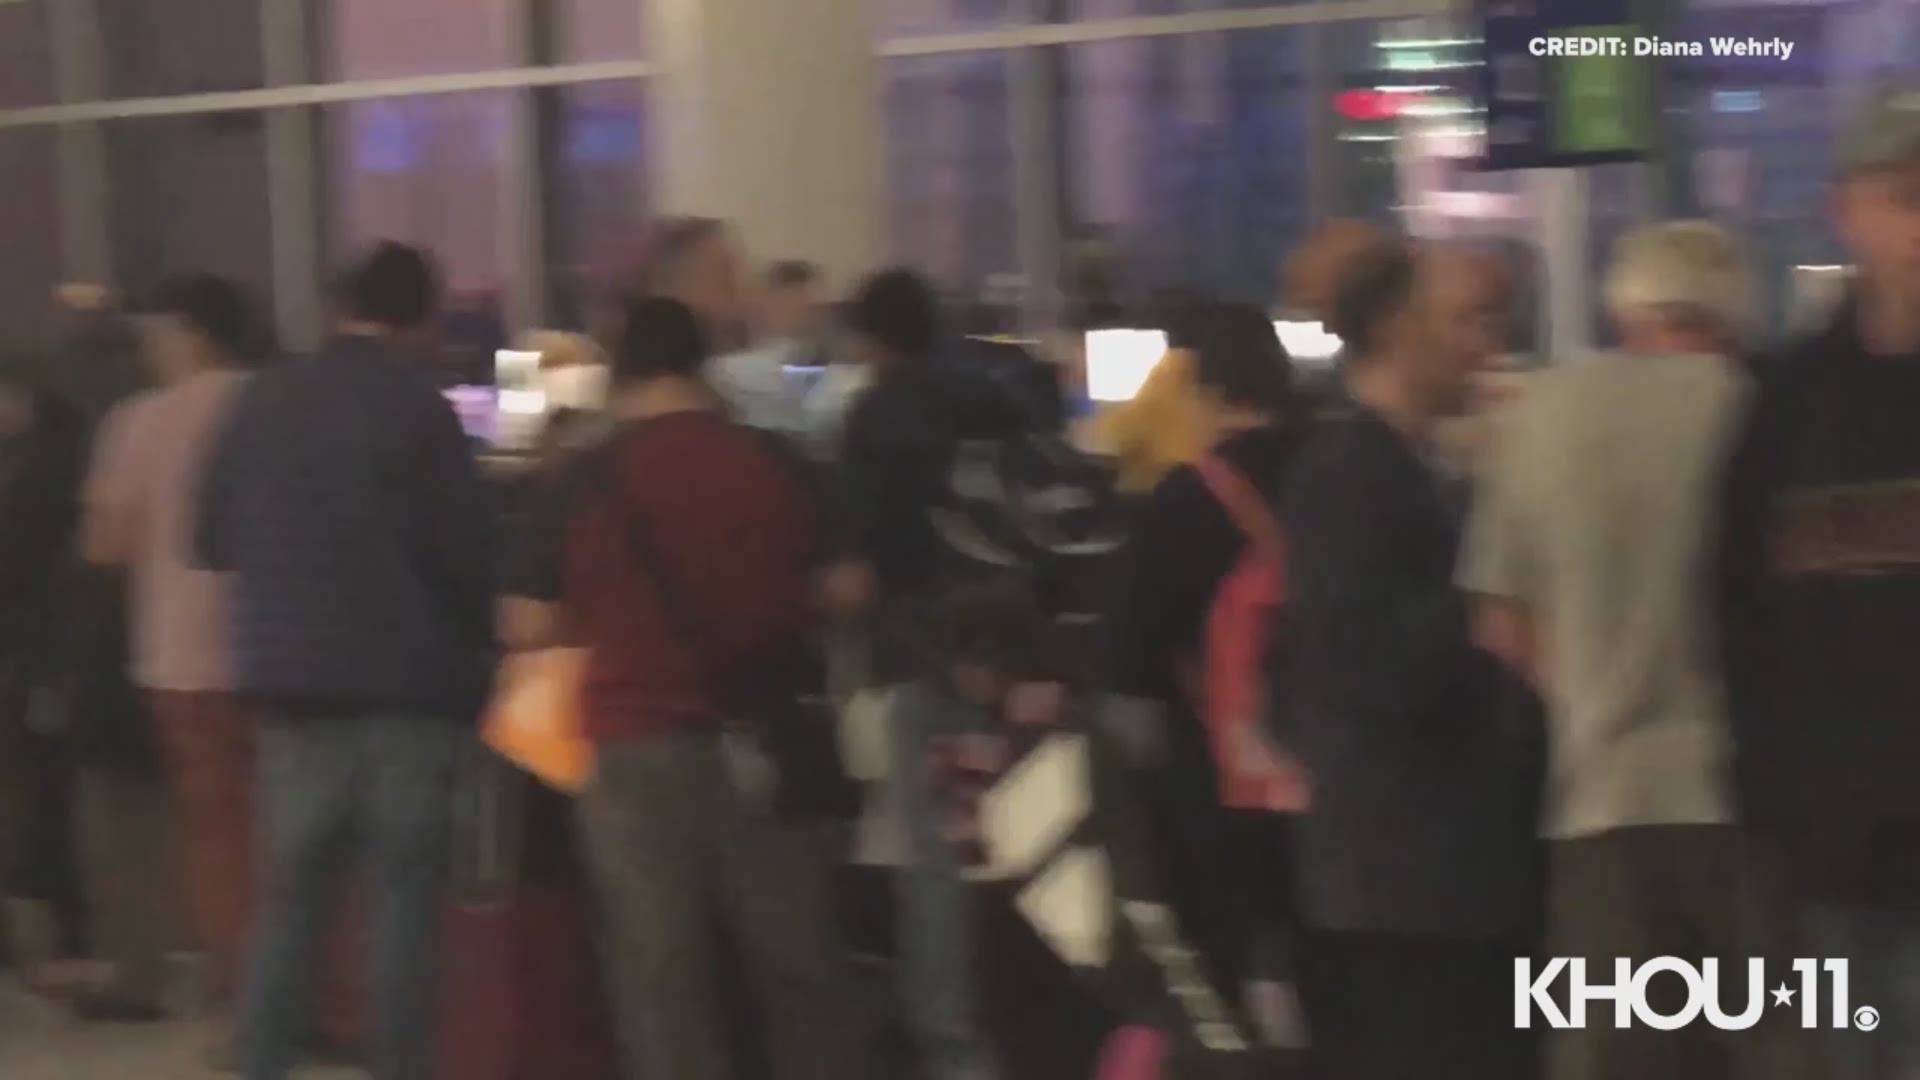 Hundreds of travelers at Bush Intercontinental Airport were left stranded after their flights were cancelled or delayed due to heavy storms moving through Southeast Texas overnight.